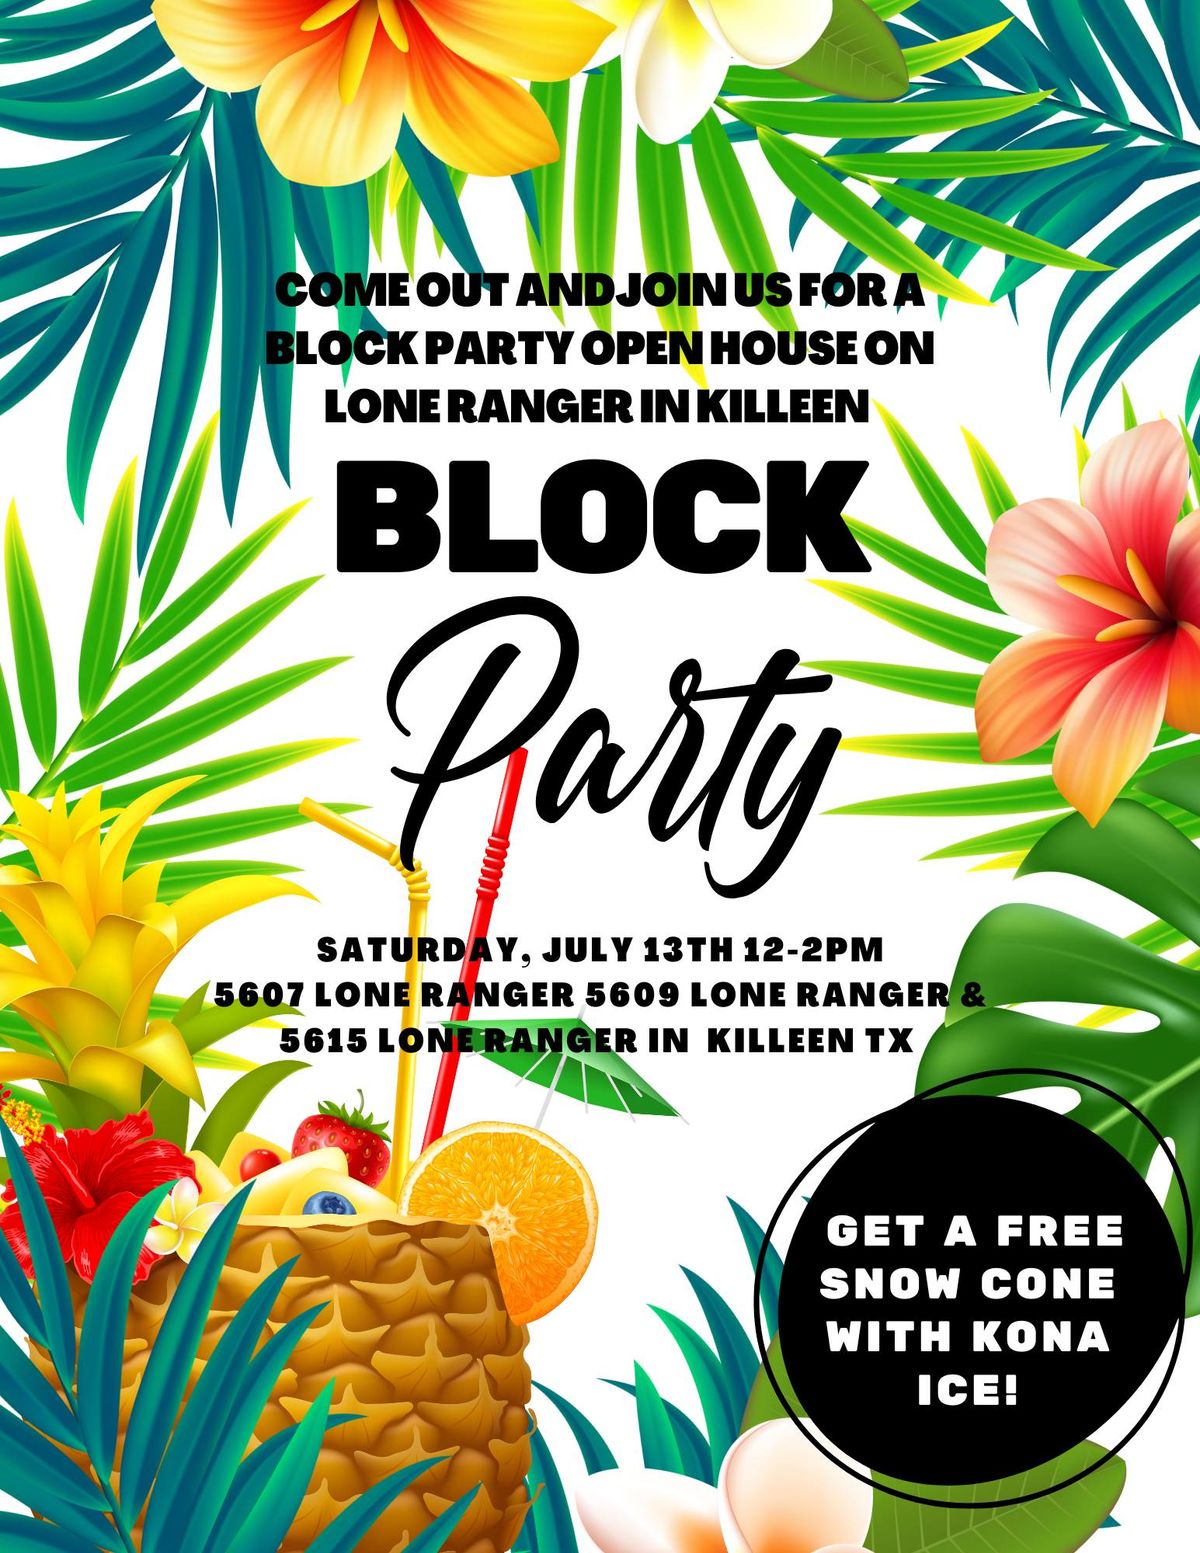 Block Party on Lone Ranger